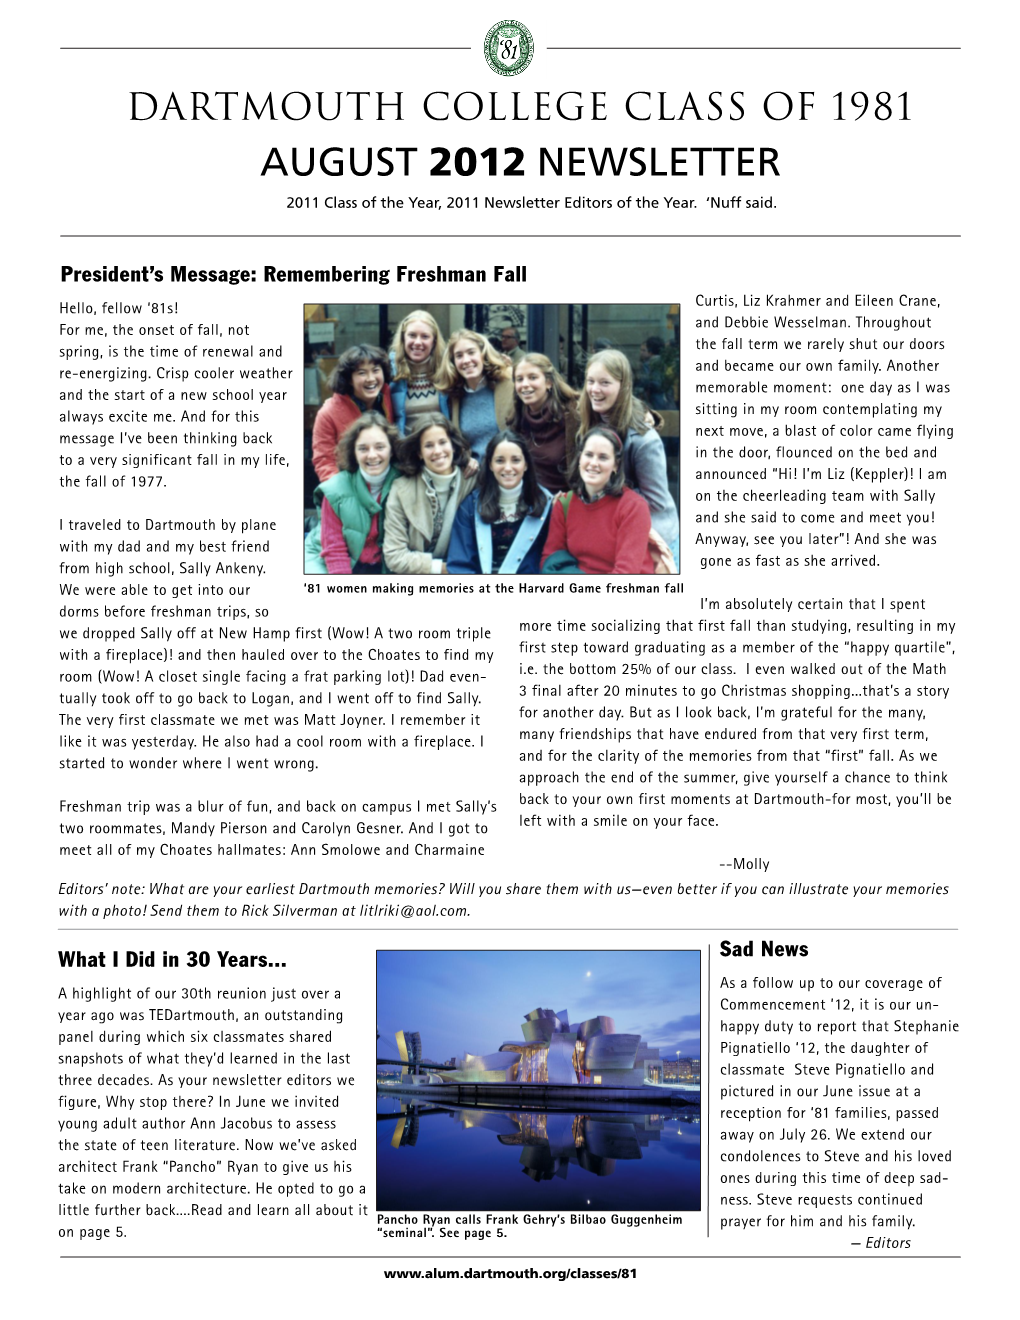 AUGUST 2012 NEWSLETTER 2011 Class of the Year, 2011 Newsletter Editors of the Year